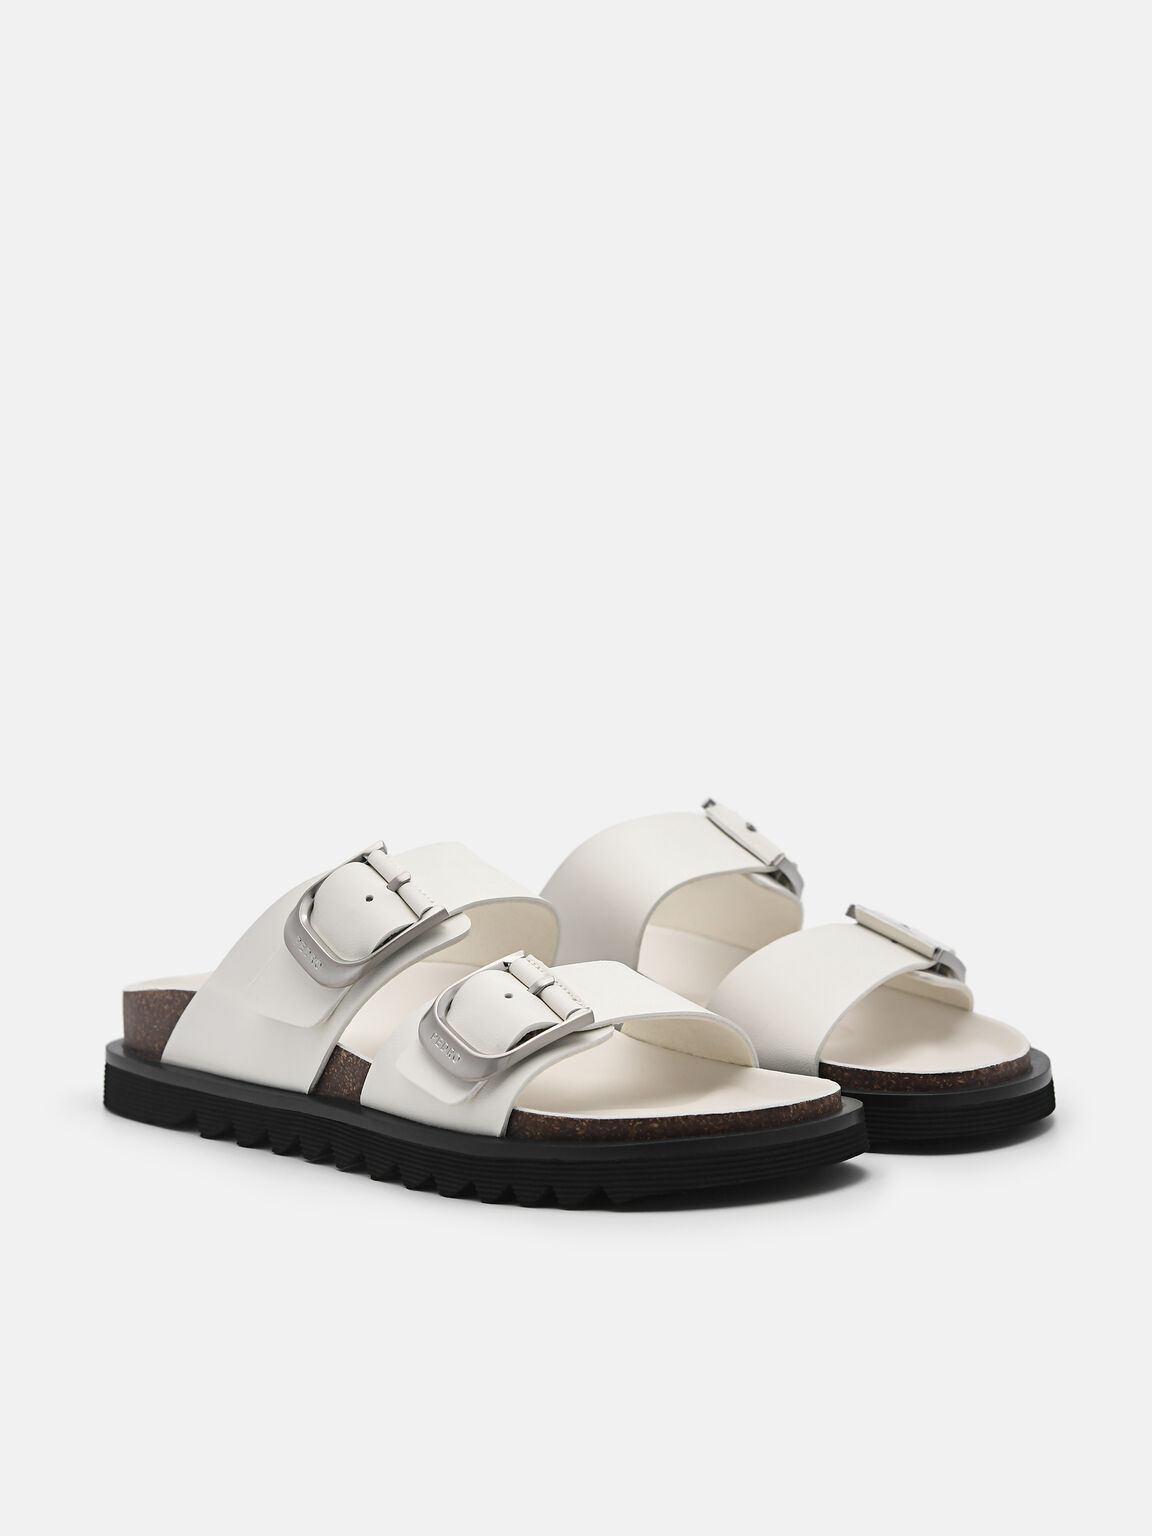 Helix Sandals, White